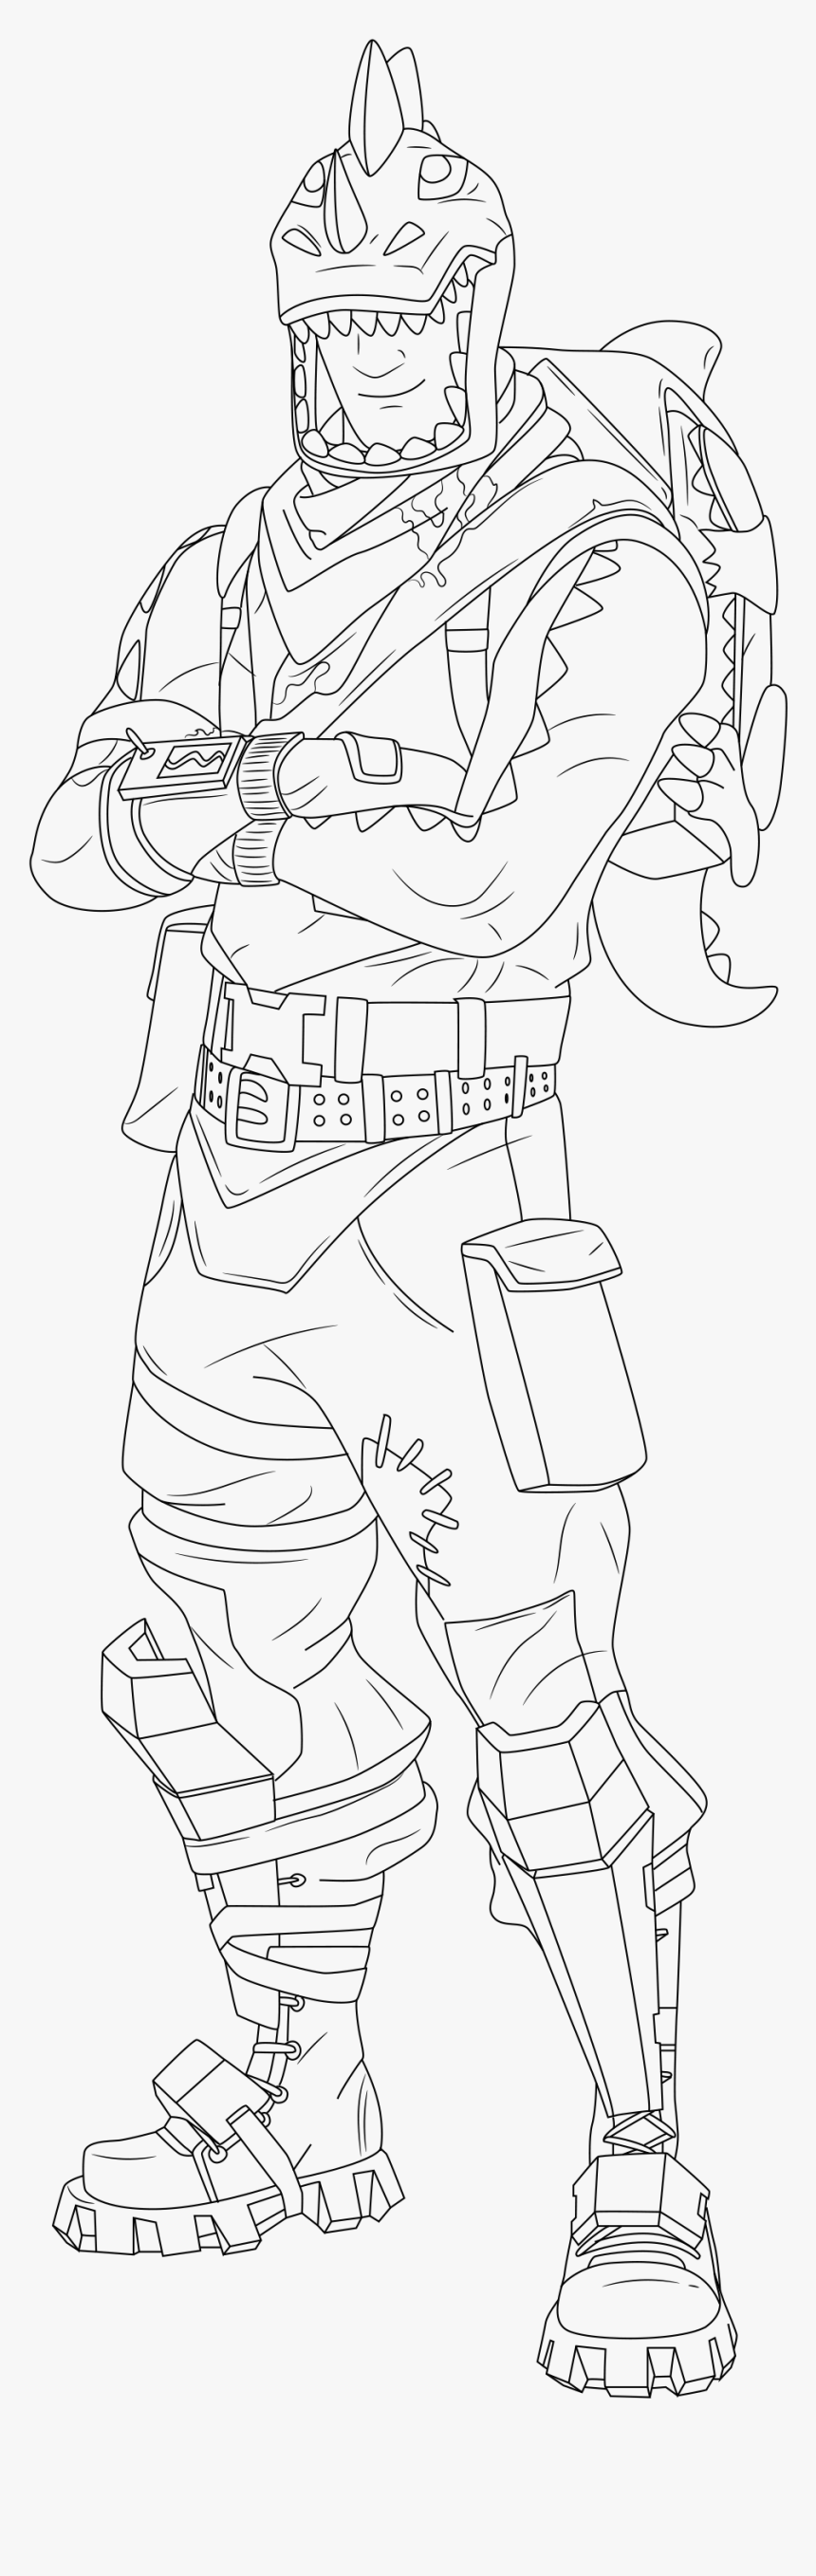 Rex Fortnite Coloring Page Rex Fortnite Coloring Pages Hd Png Download Kindpng